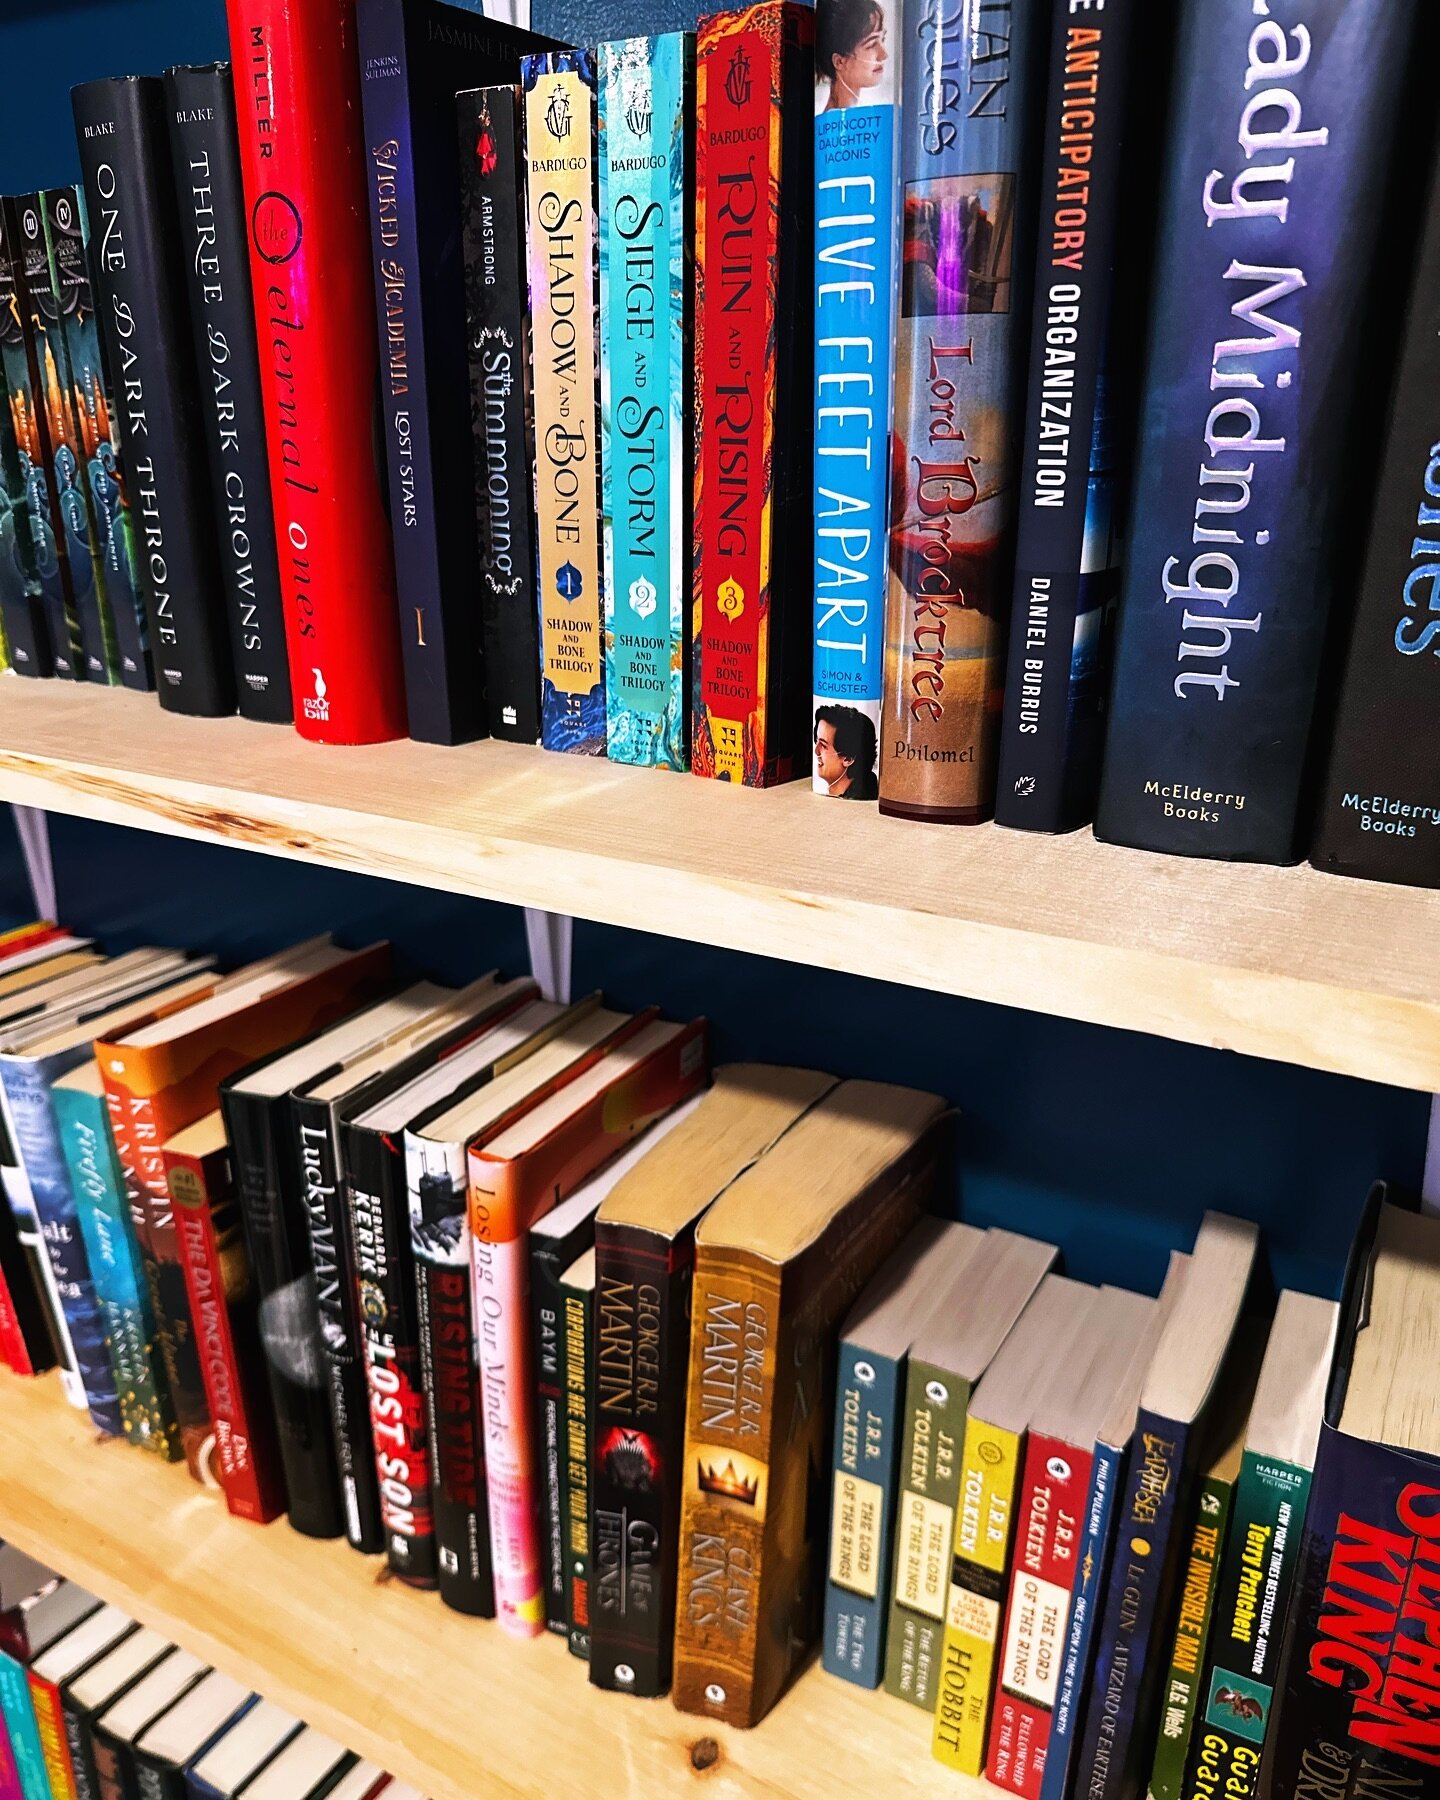 Have you checked out our book nook yet? Upstairs in our loft there are some cozy chairs and so many wonderful donated books to choose from! You can even find full versions of your favorite series!
.
.
.
.
.
#bakery #glutenfreebakery #glutenfree #cafe